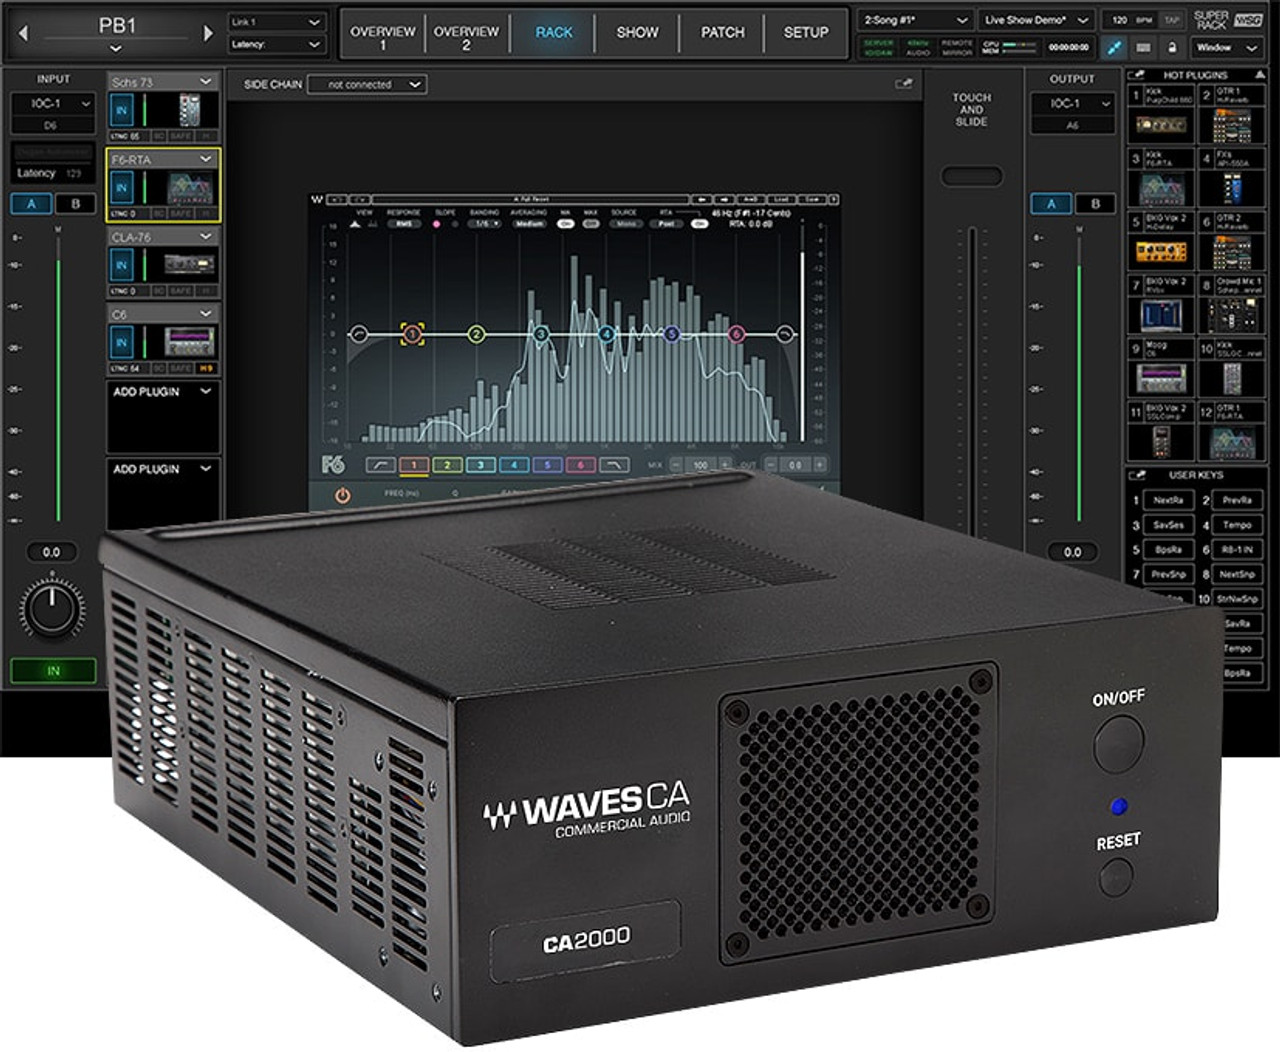 DSP　CA2000　Waves　Engine　Commercial　Audio　Sound　Productions